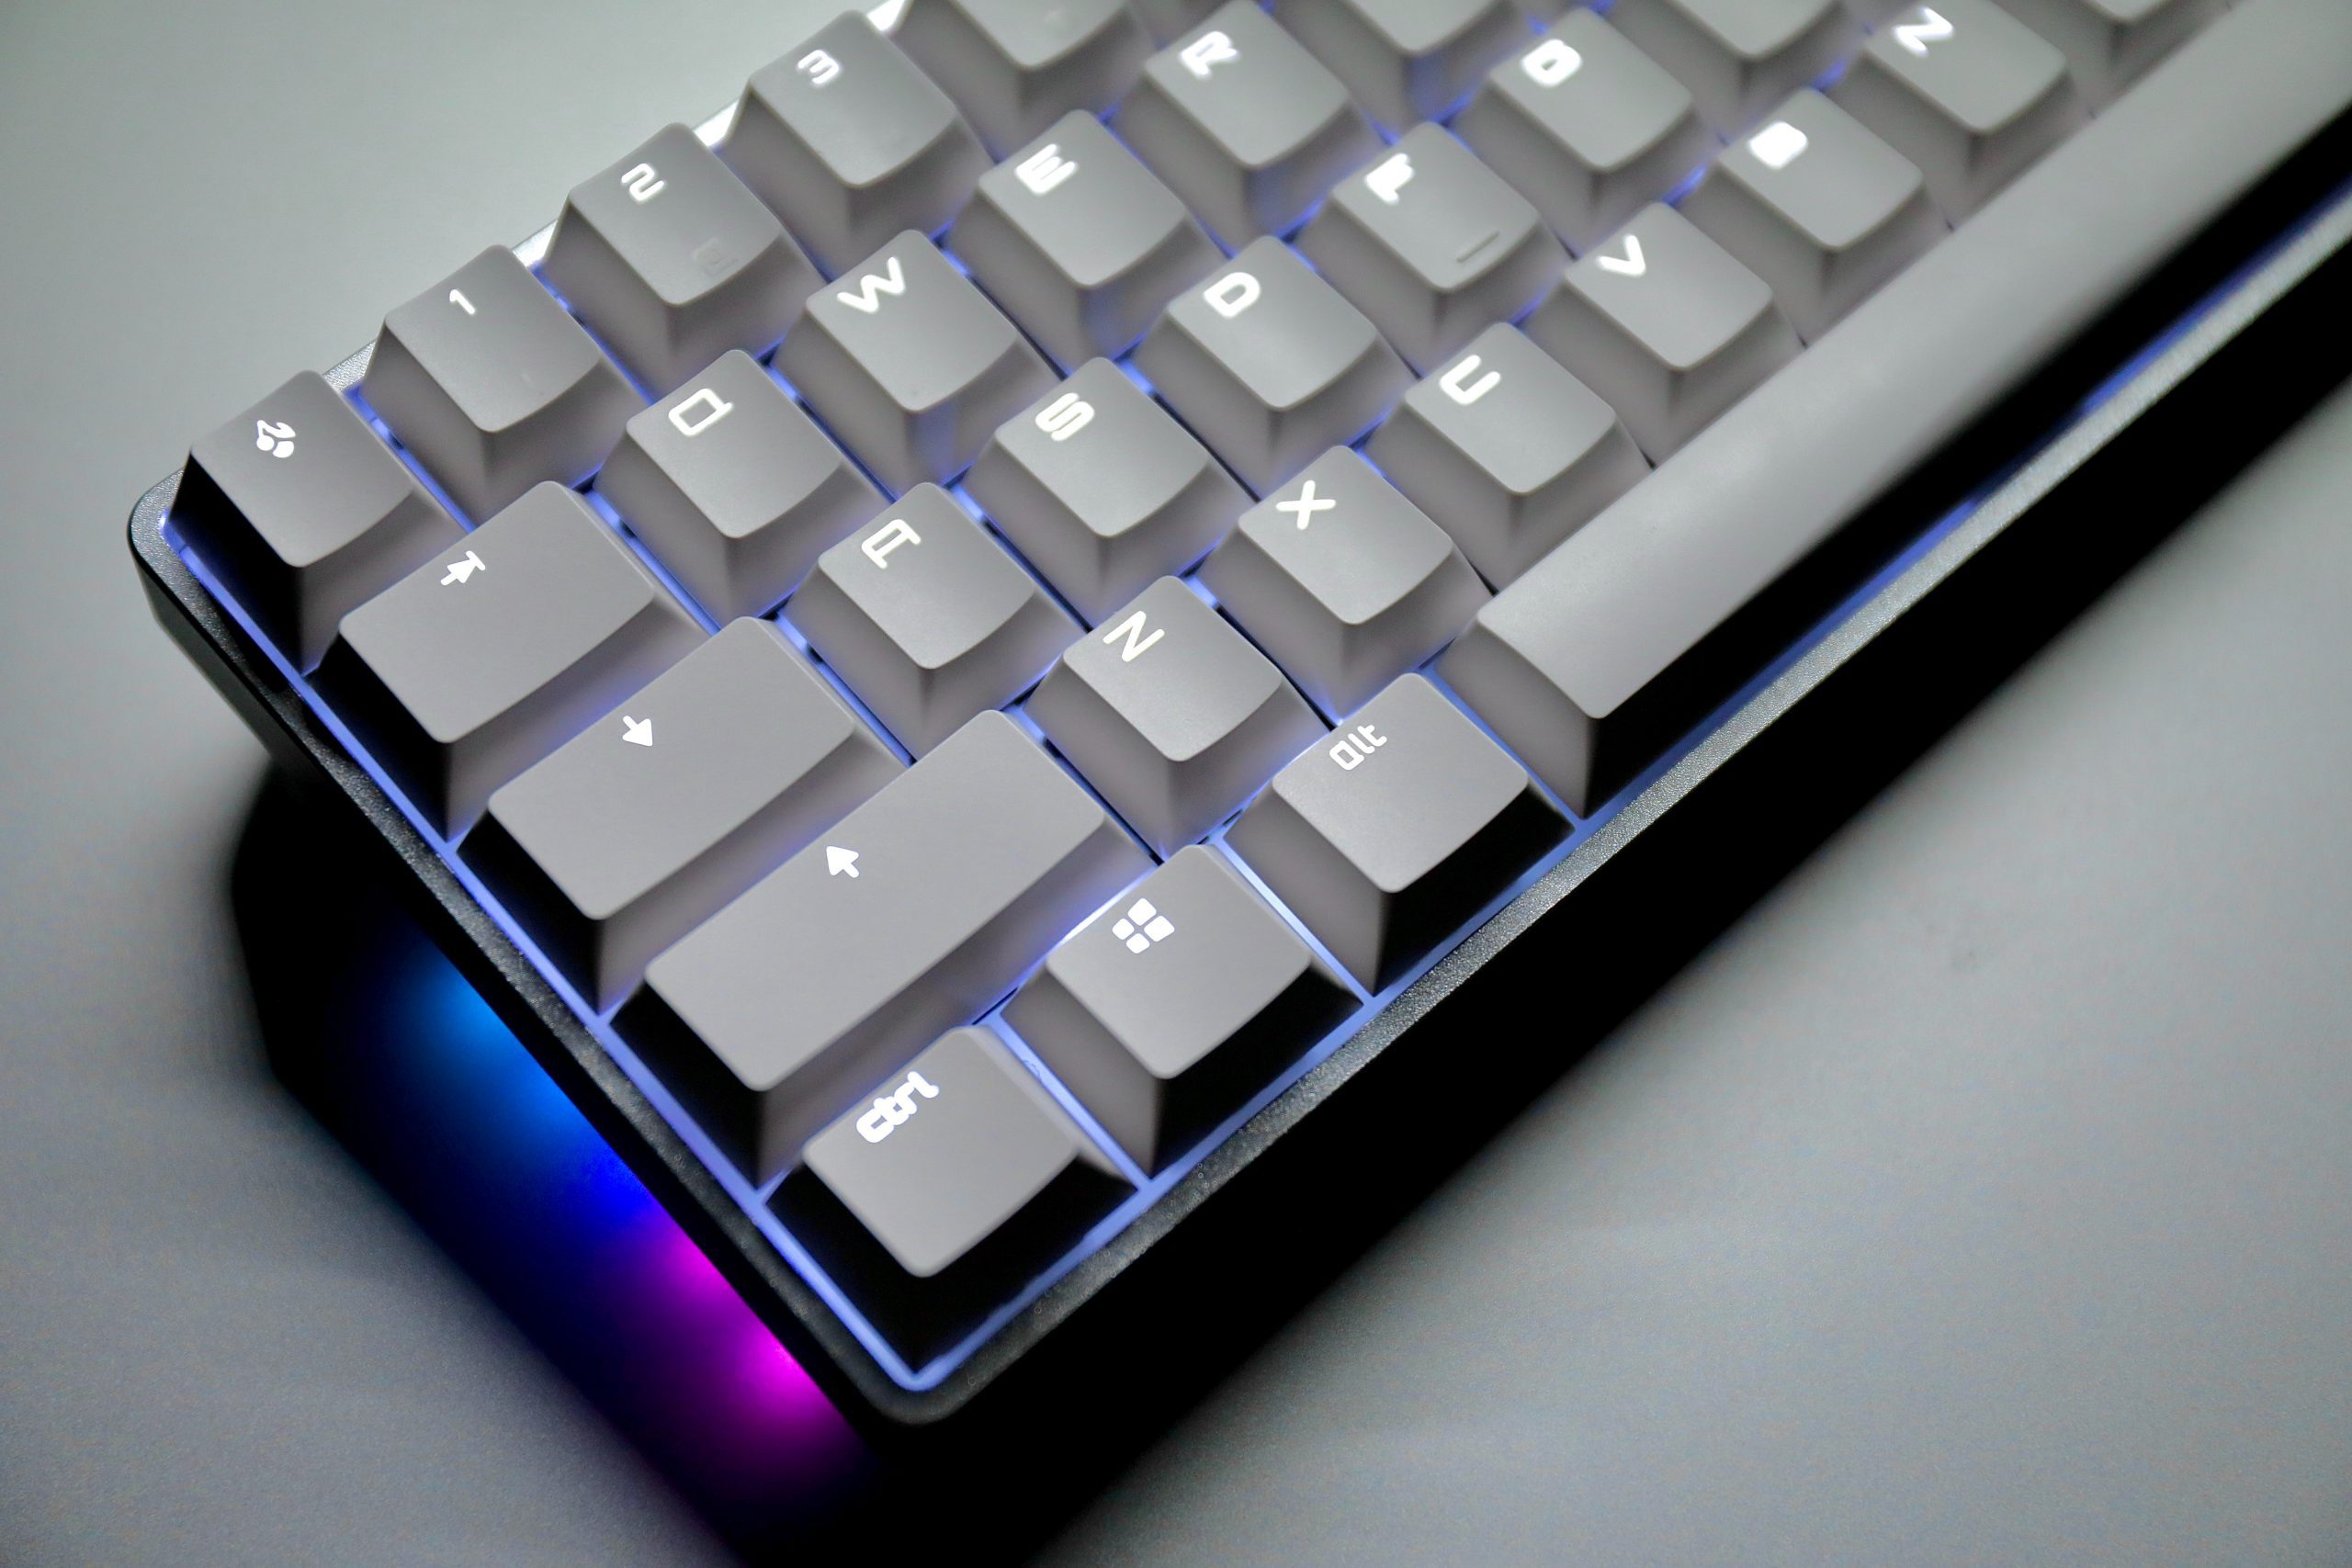 Why you should consider a mechanical keyboard for your Mac